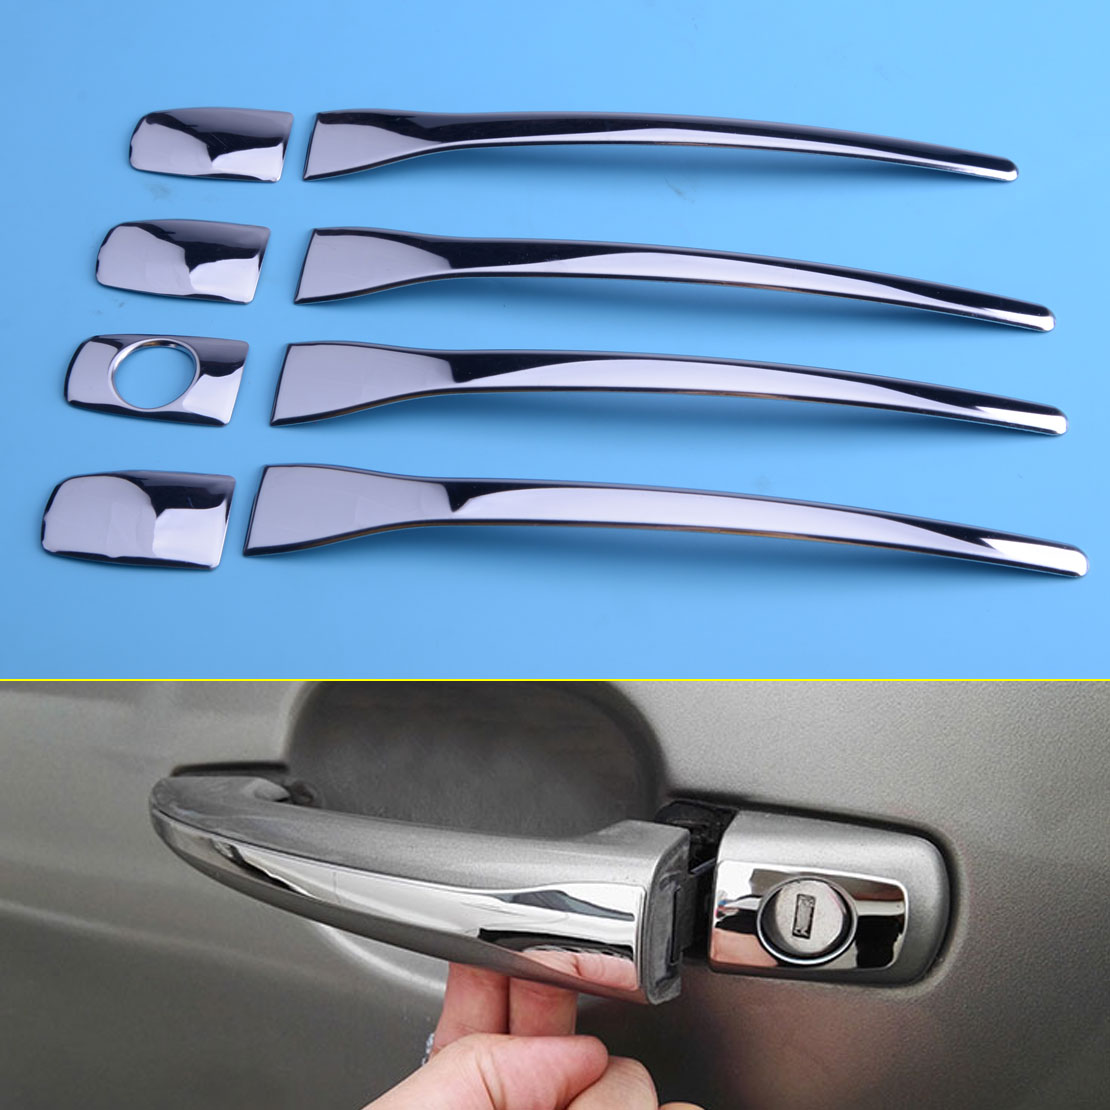 ABS Chrome Outer Door Handle Cover Trim For Peugeot 2008 2014 Car Styling 8PCS//SET